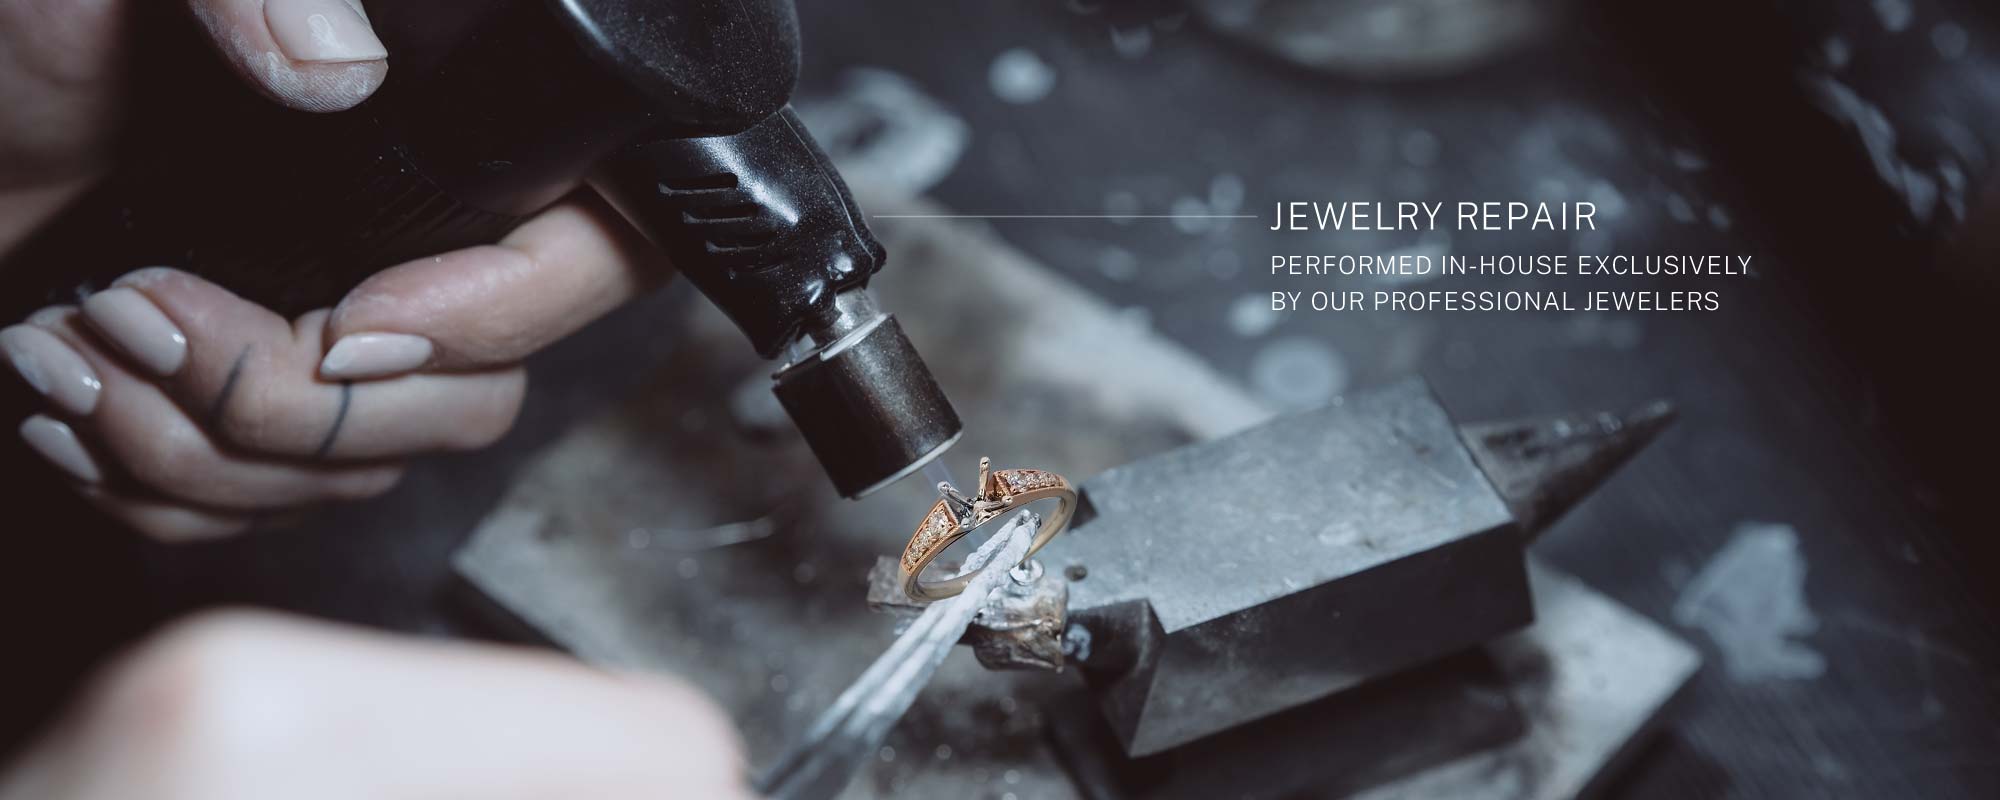 Jewelry Repair Service At Marks Jewelry Co. LLC